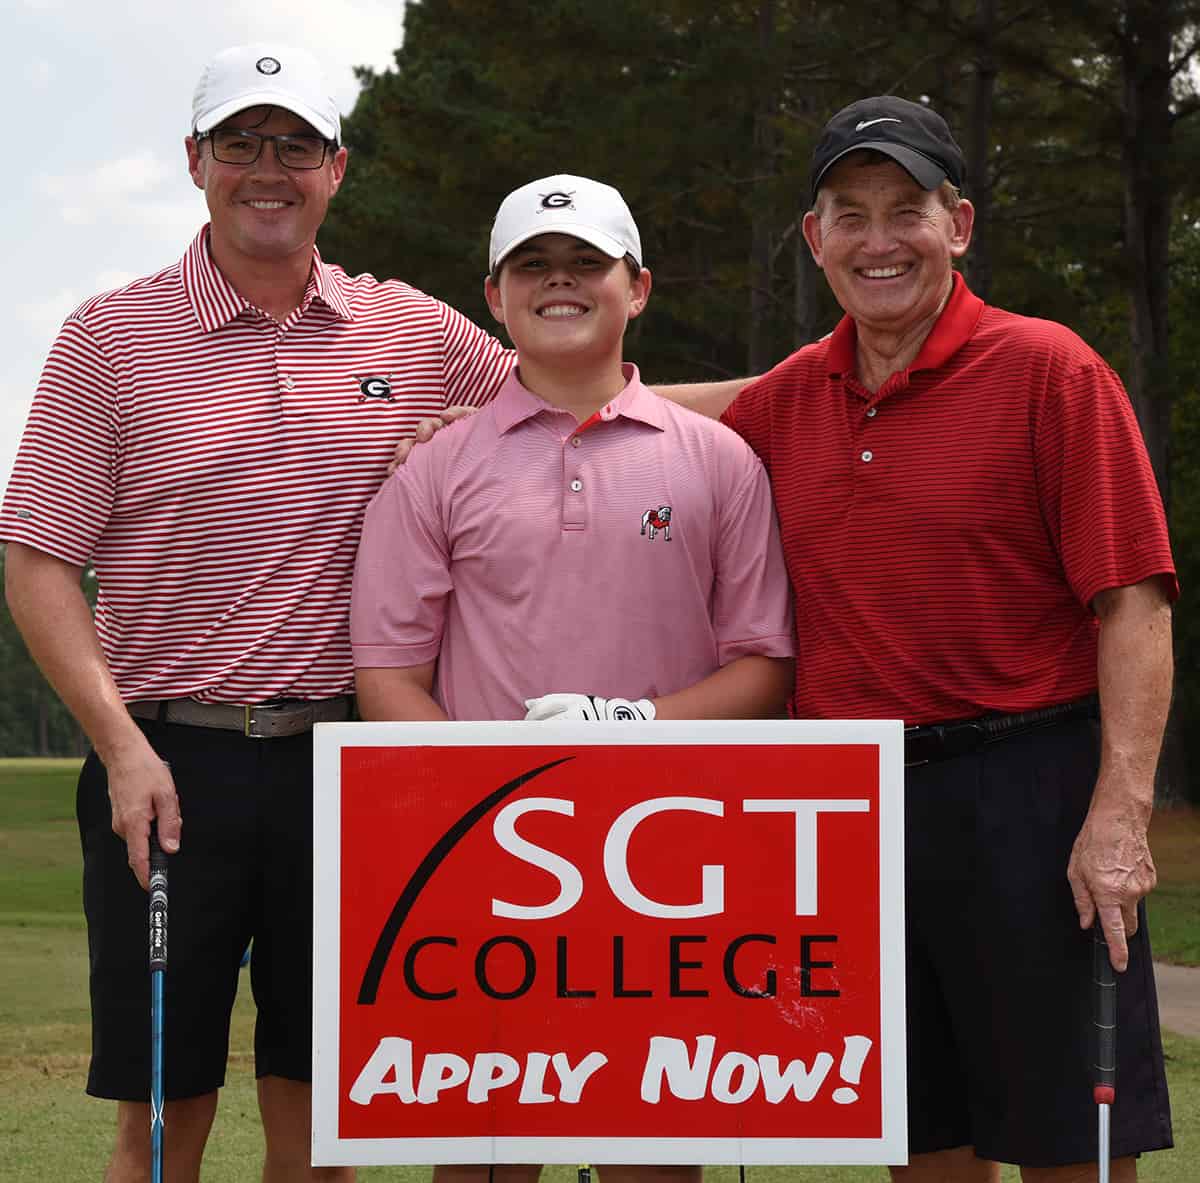 SGTC President Emeritus Sparky Reeves (right) is shown above with his son, Kevin, and grandson, Will, at the 2019 Sparky Reeves Classic Golf Tournament.